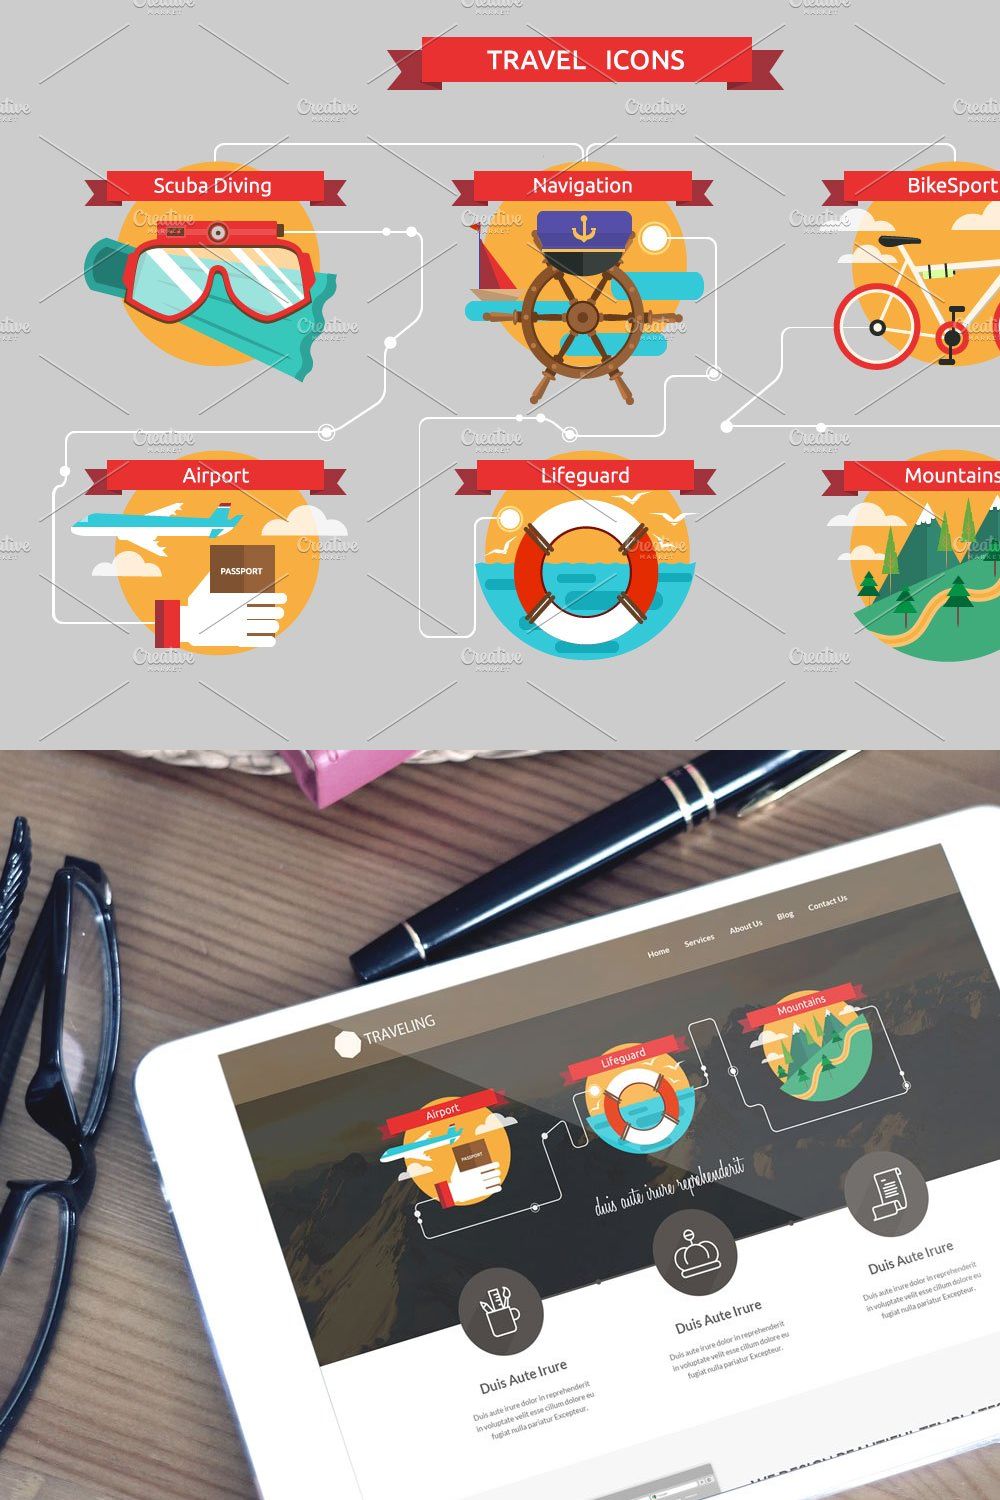 Vector traveling icons pinterest preview image.